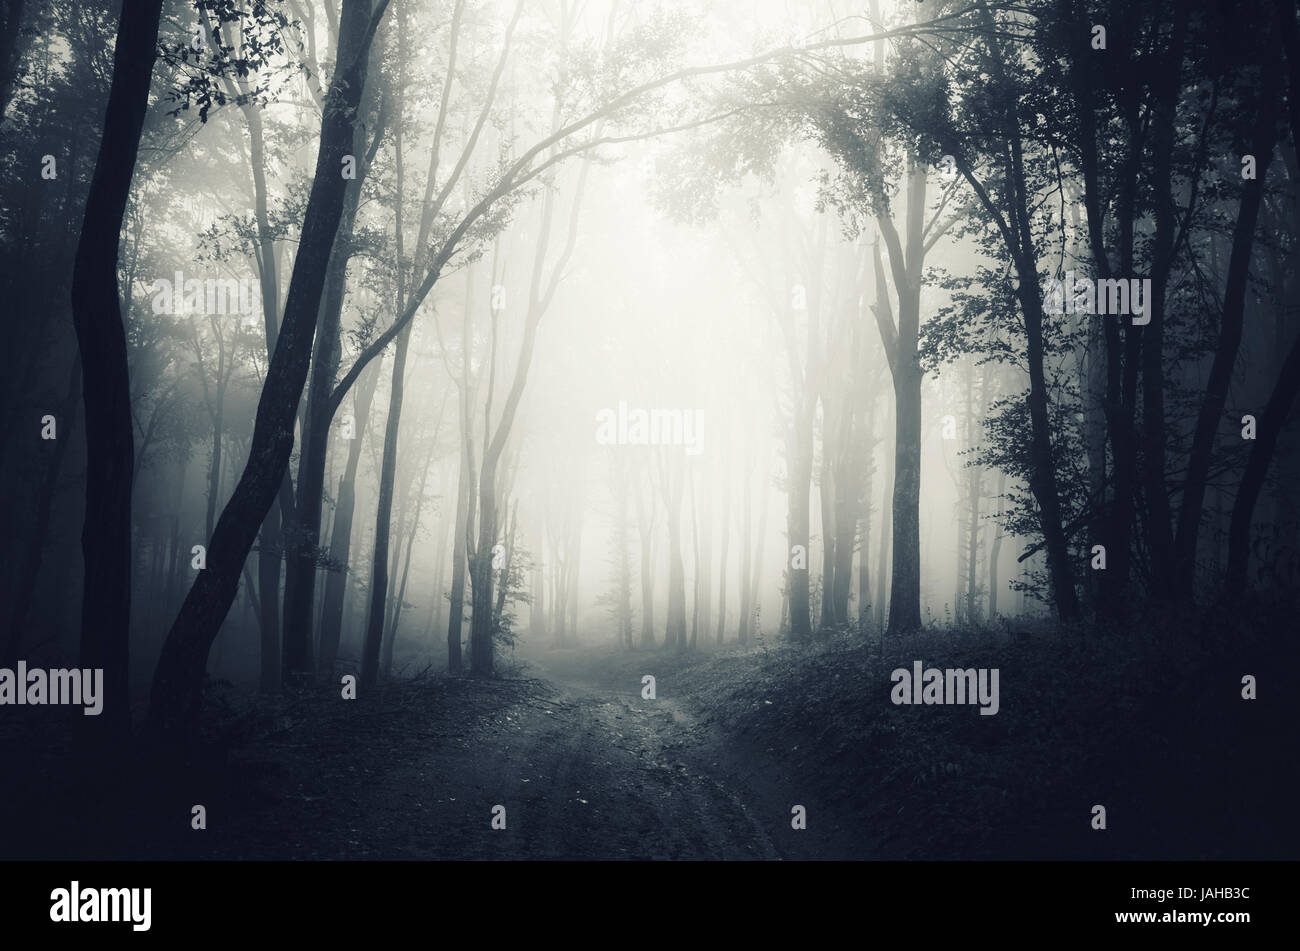 Fantasy forest background. Trees and woods road in fog, Halloween landscape Stock Photo